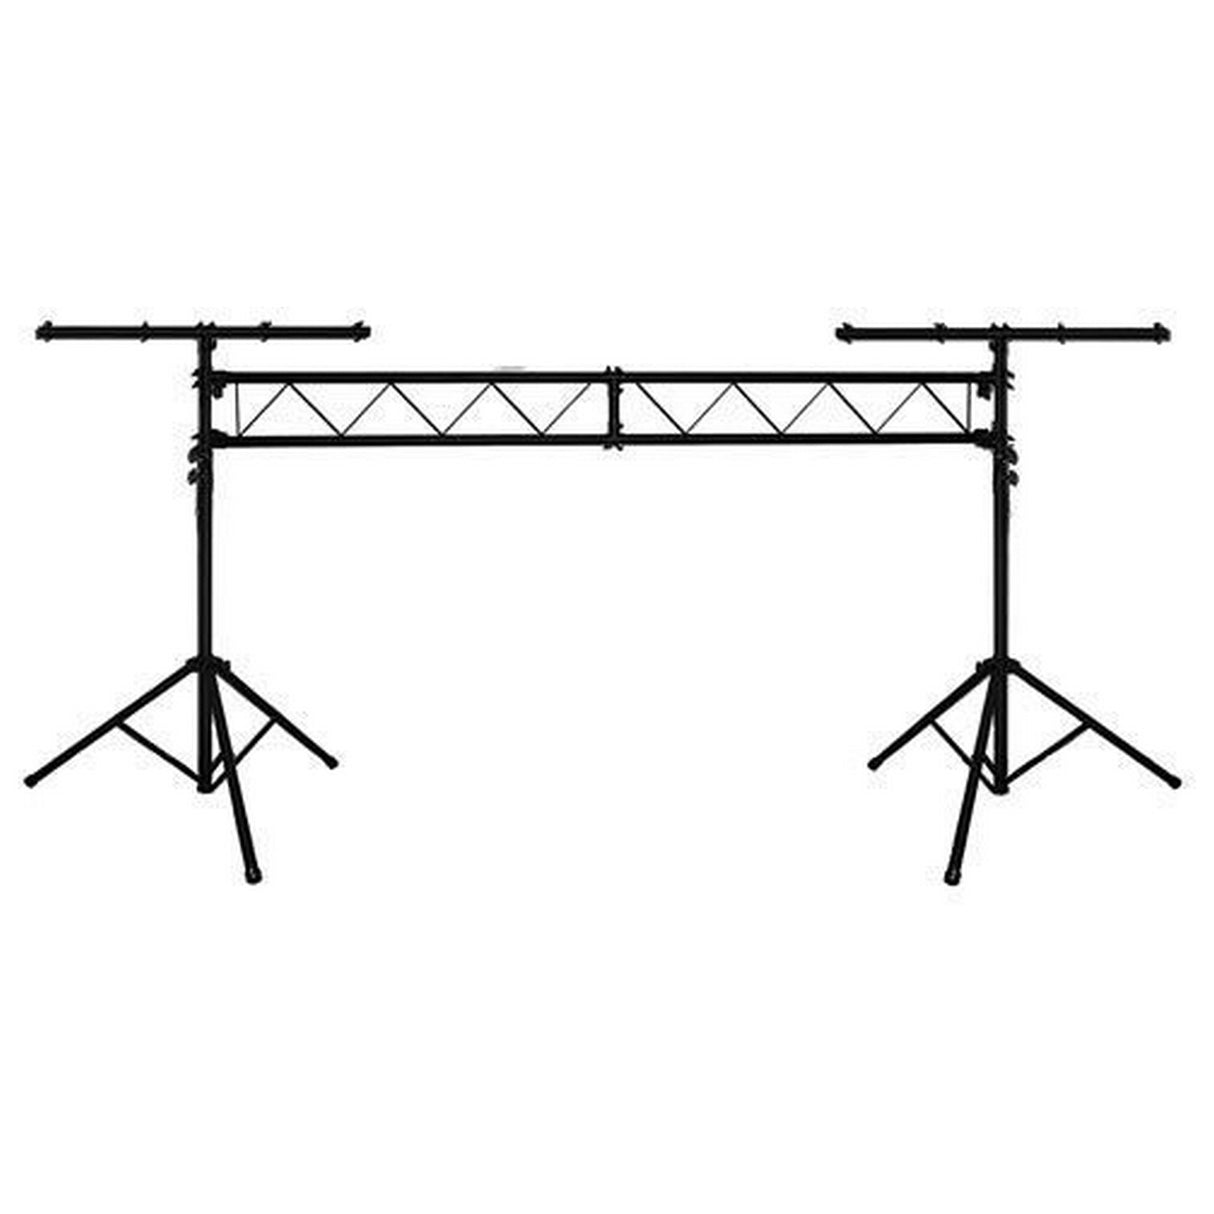 Accu Stand LTS50T AS Portable Truss Mounting System